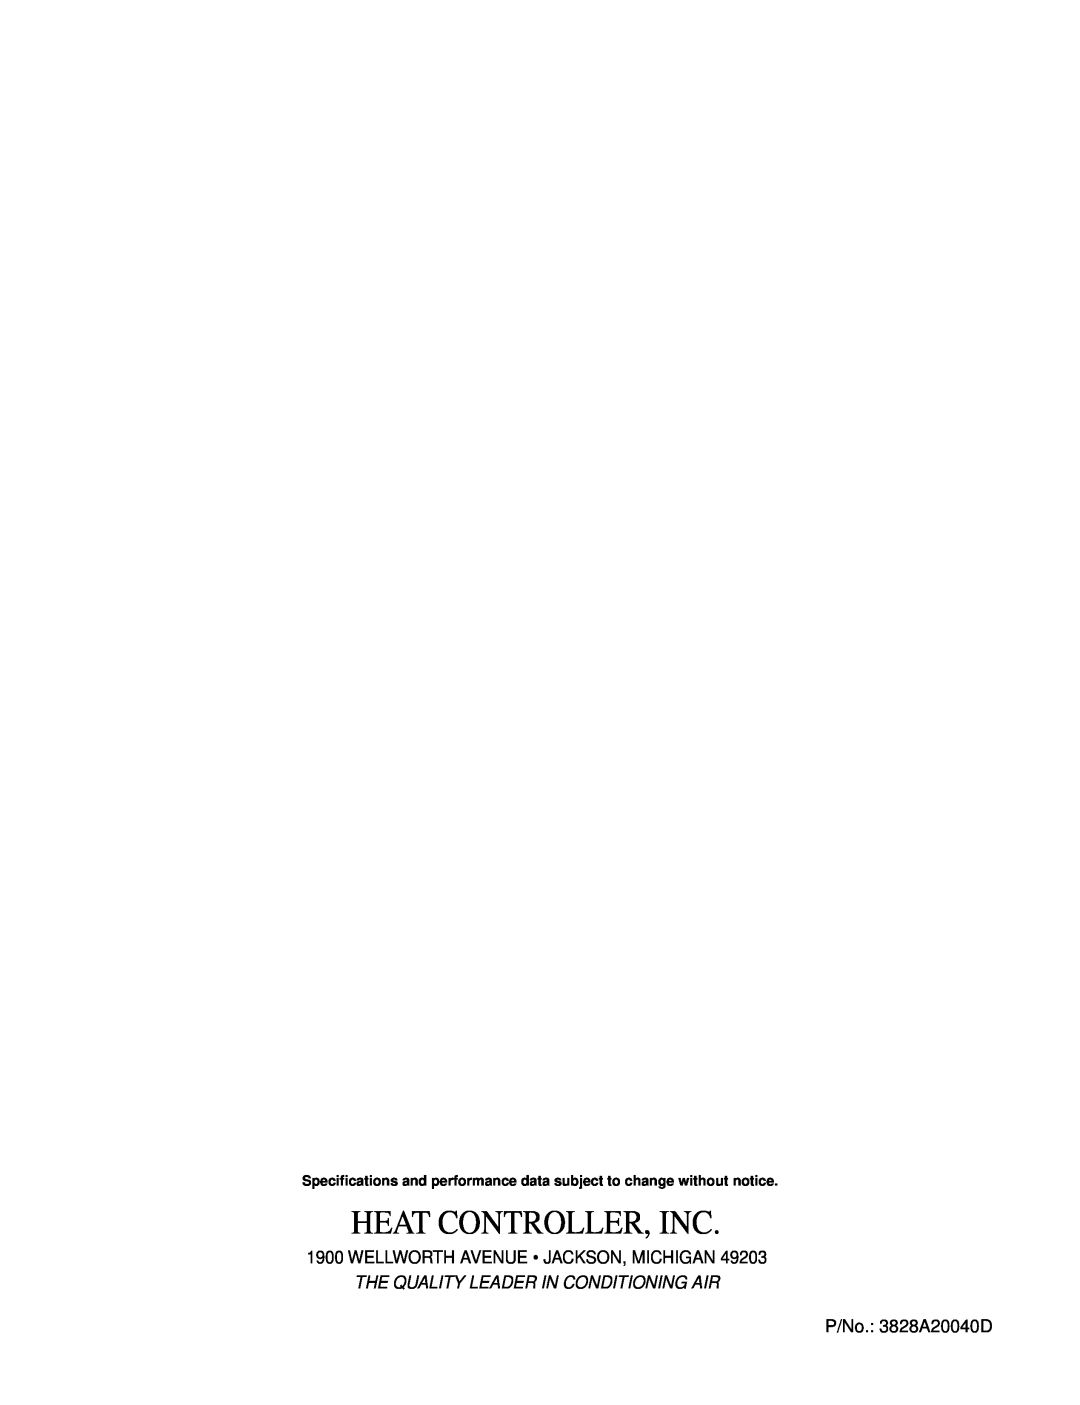 Heat Controller BD-101 Heat Controller, Inc, Wellworth Avenue Jackson, Michigan, The Quality Leader In Conditioning Air 